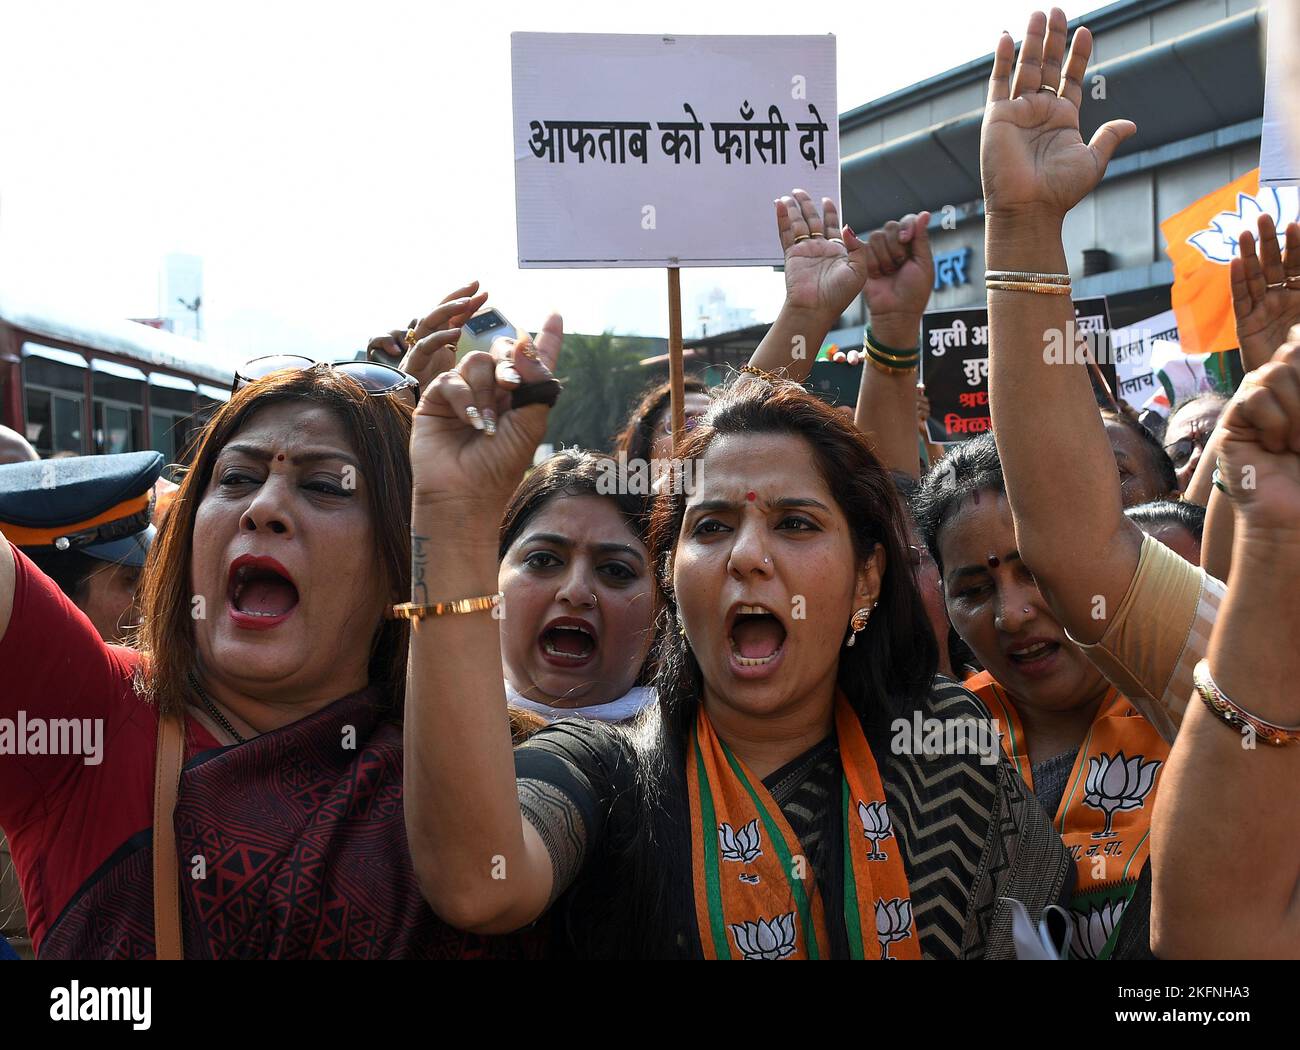 Mumbai, India. 19th Nov, 2022. Women supporters of Bharatiya Janata Party (BJP) chant slogans during the protest demanding Aftab Poonawala be hanged. Aaftab Poonawala murdered his girlfriend Shraddha Walkar who was his live-in partner and they stayed in Delhi. He cut her body parts into thirty five pieces and kept it in a fridge for almost three weeks before disposing it off in a jungle area in Delhi. (Photo by Ashish Vaishnav/SOPA Images/Sipa USA) Credit: Sipa USA/Alamy Live News Stock Photo